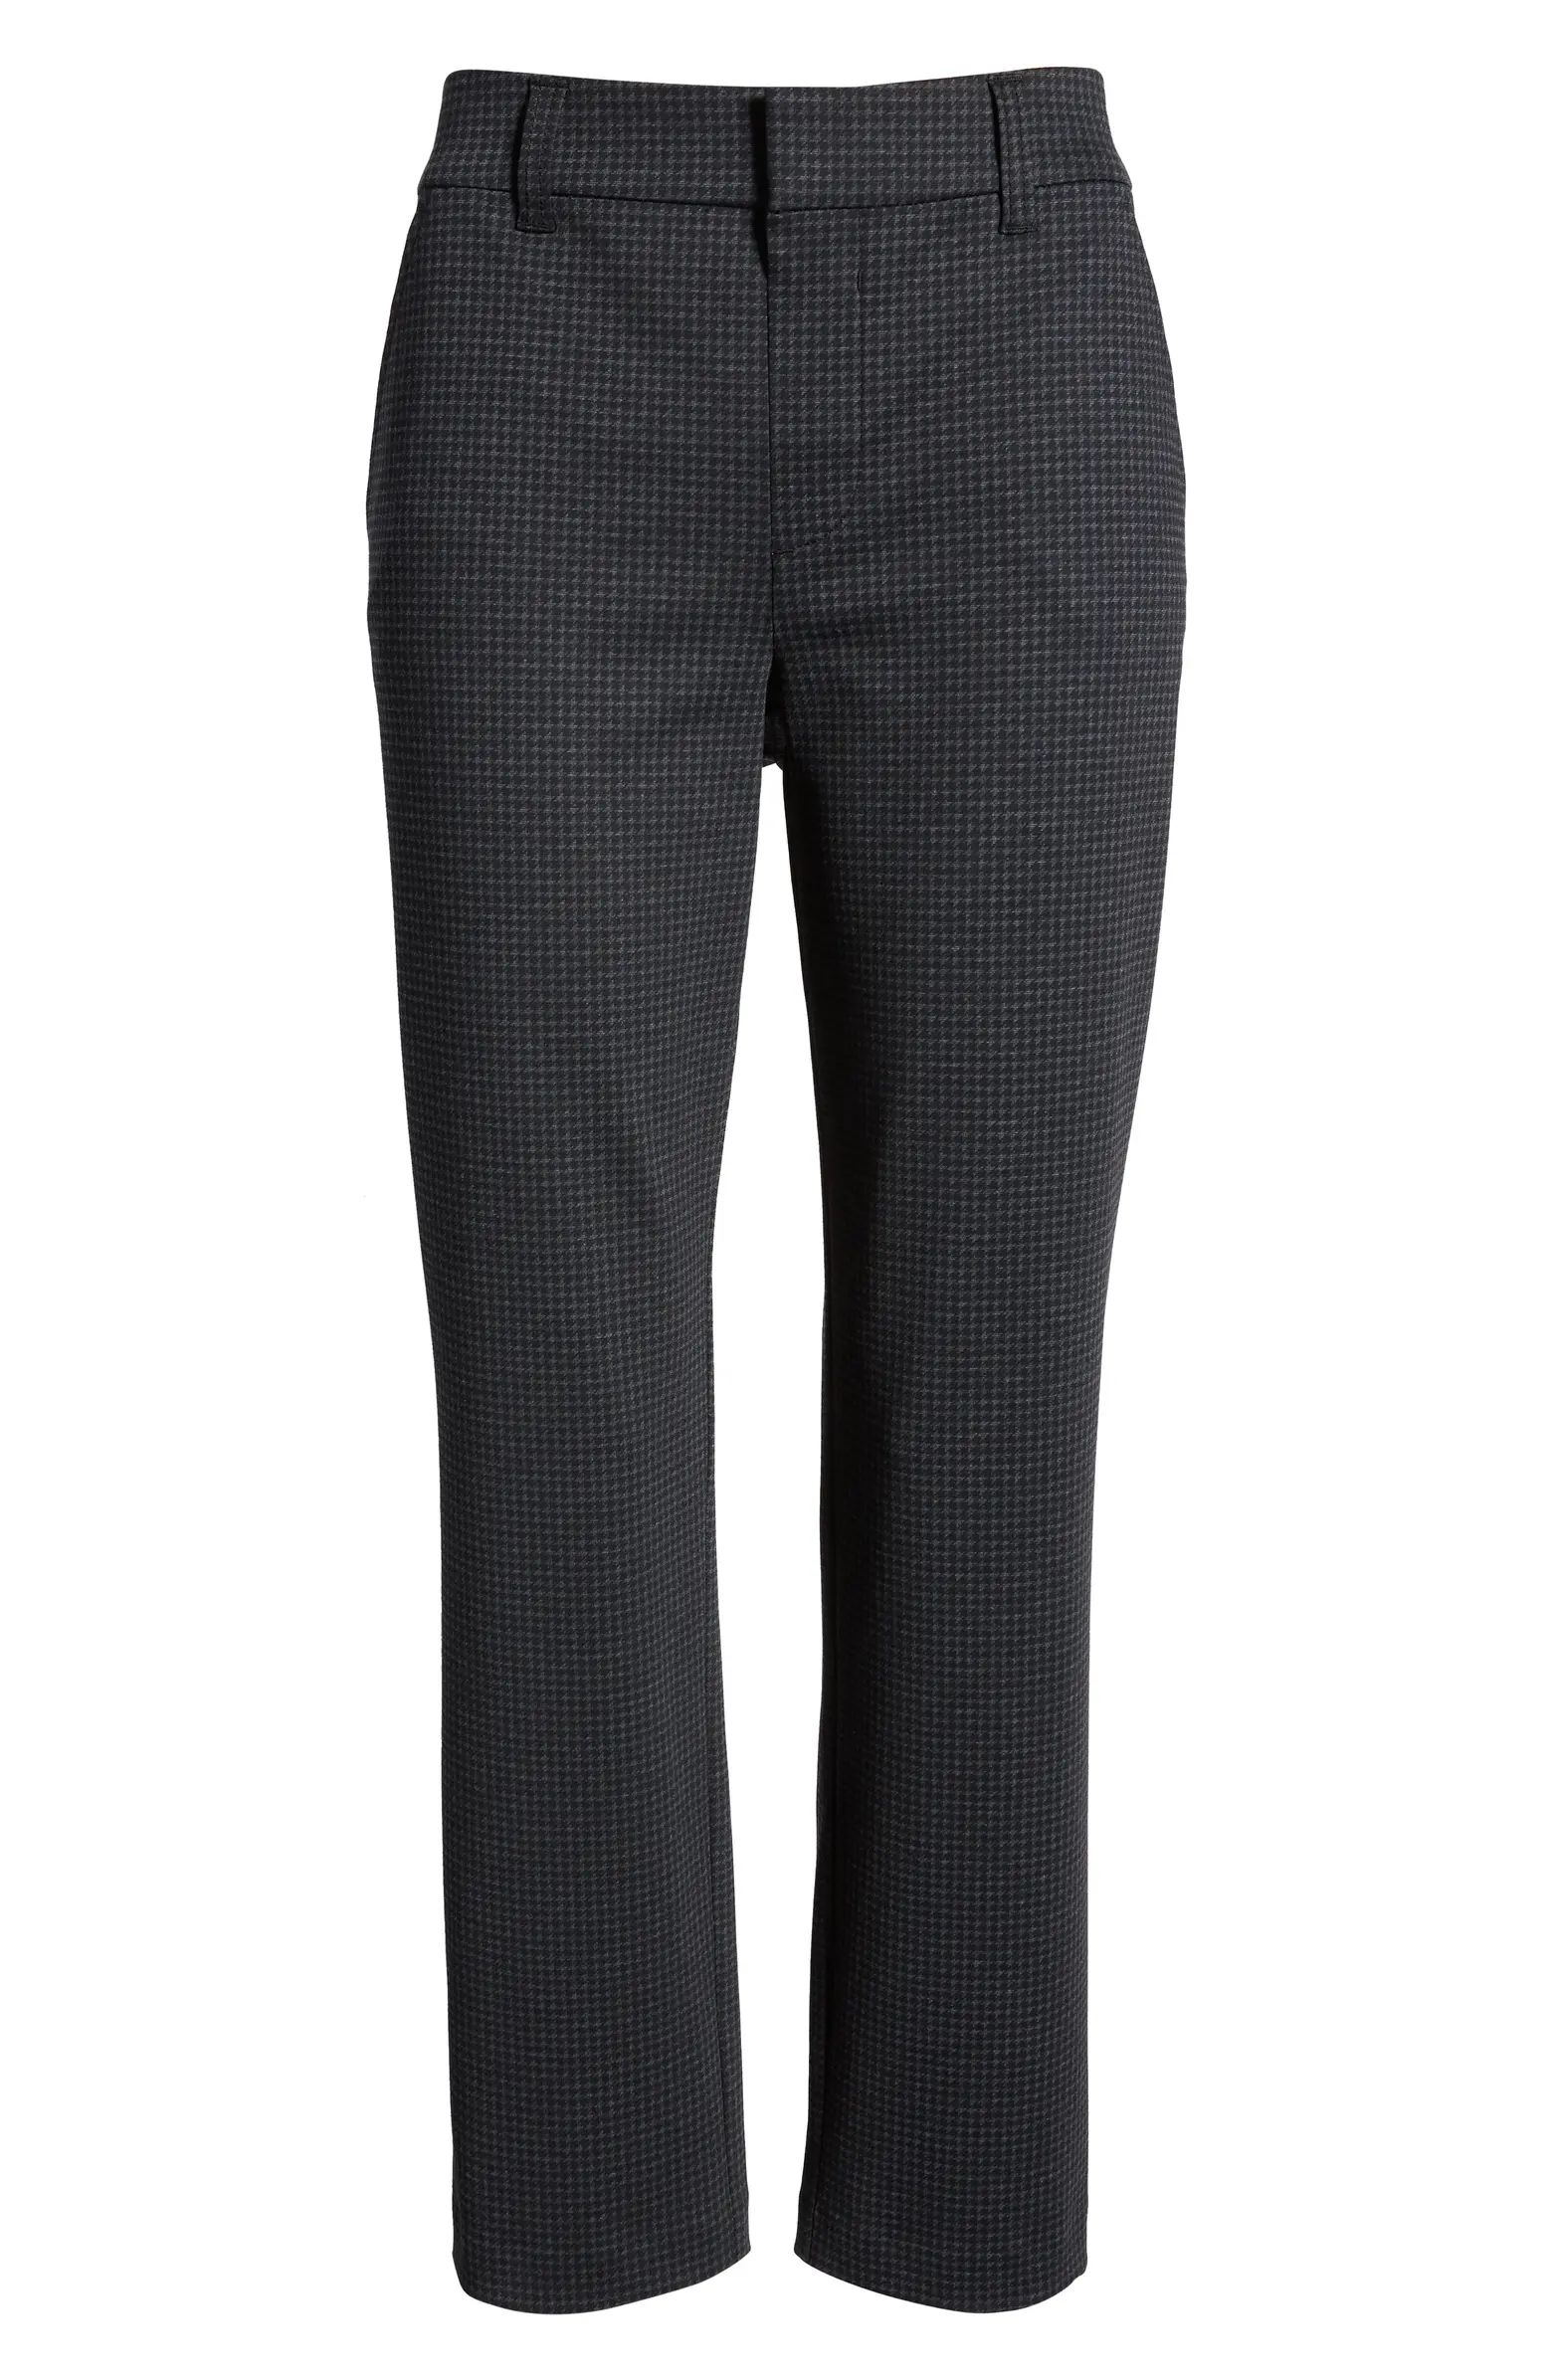 'Ab'Solution High Waist Trousers | Nordstrom